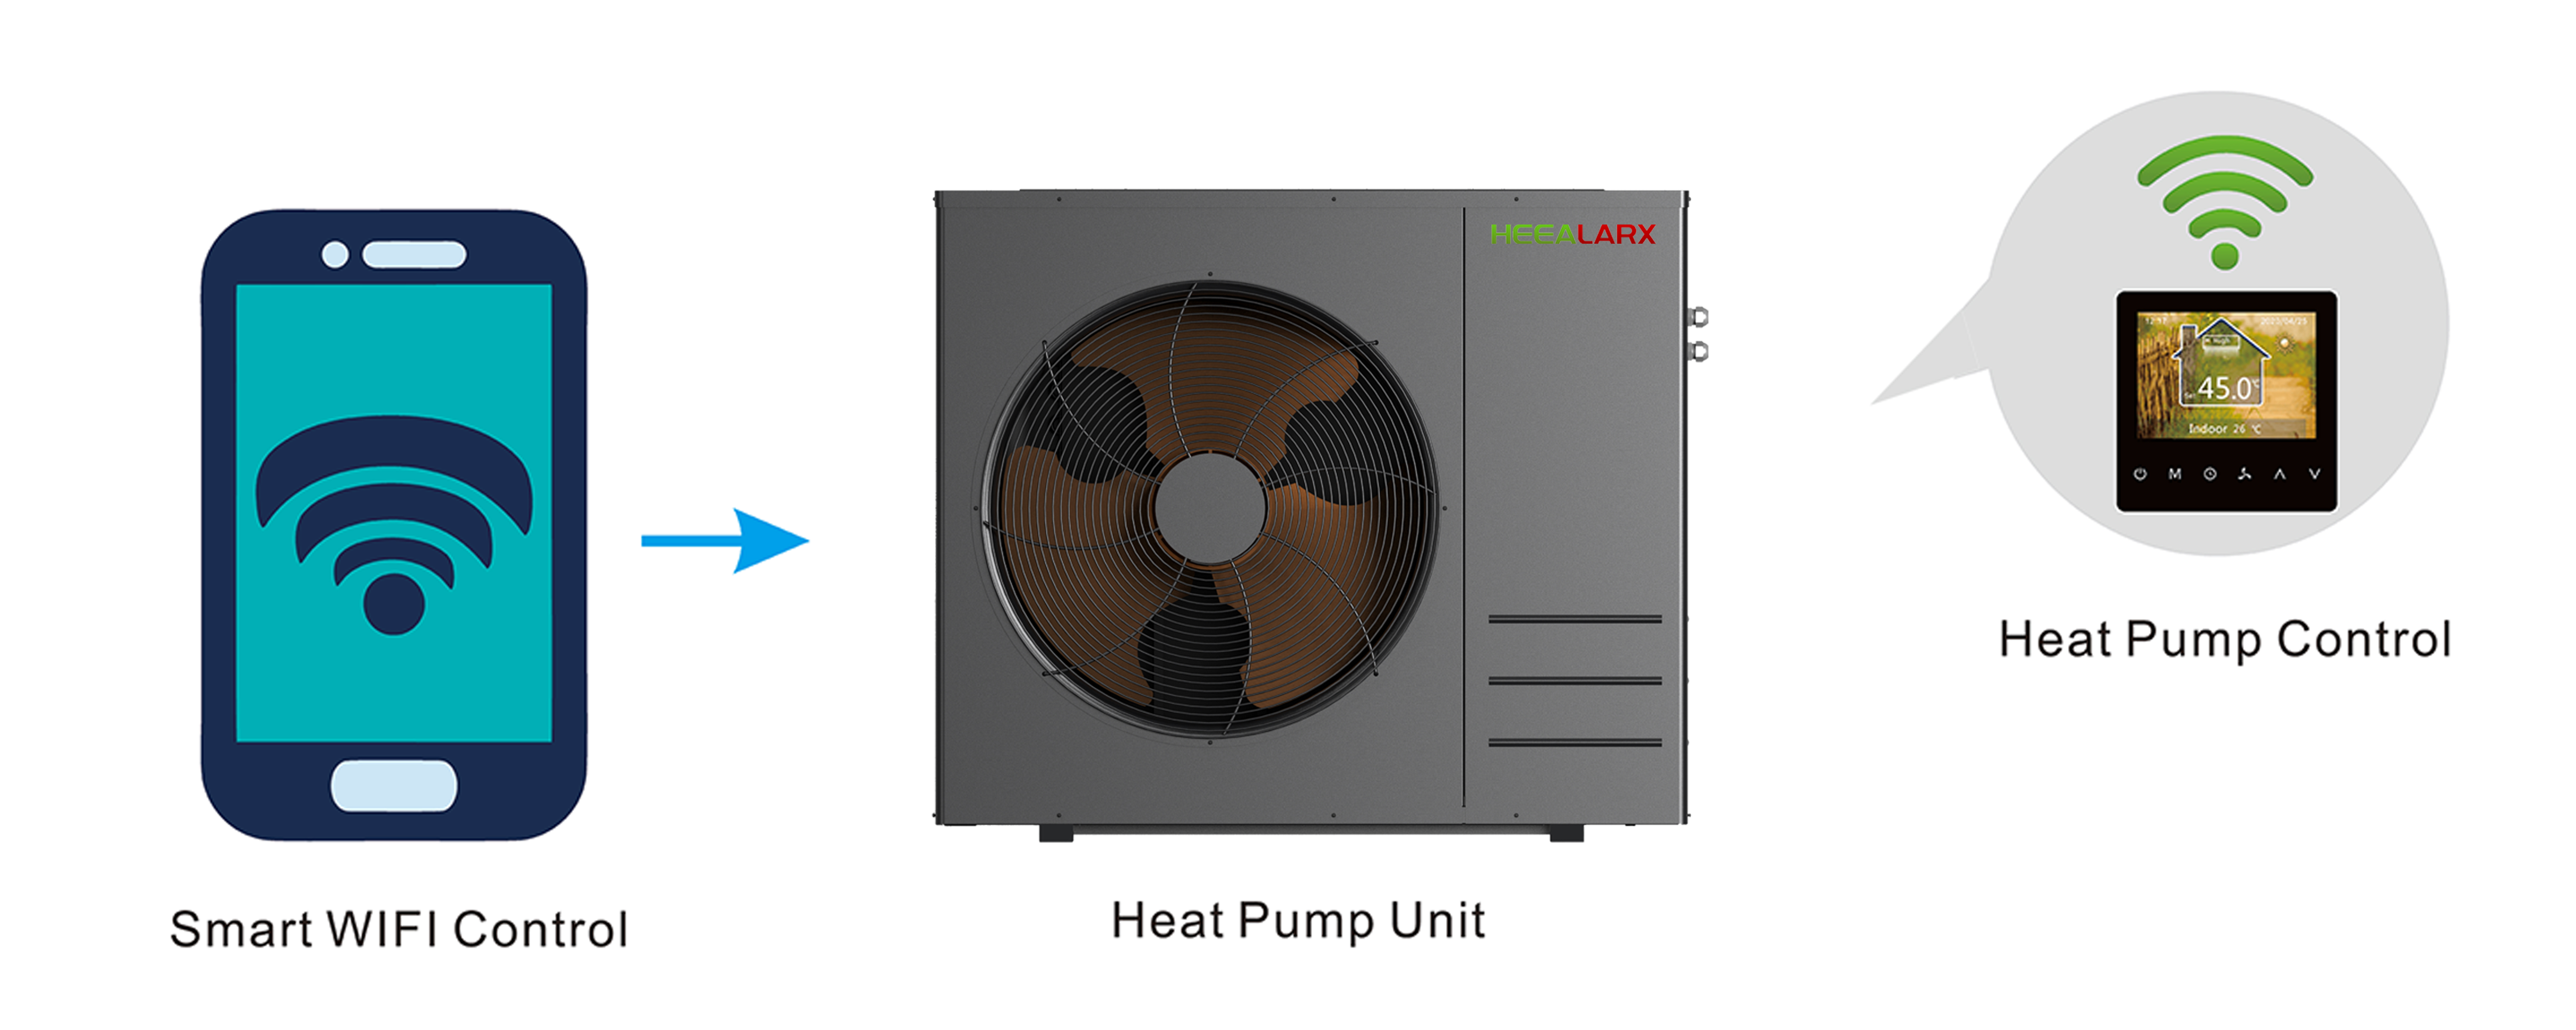  Full Inverter House Heating Heat Pump For Hot Water Supply Details 